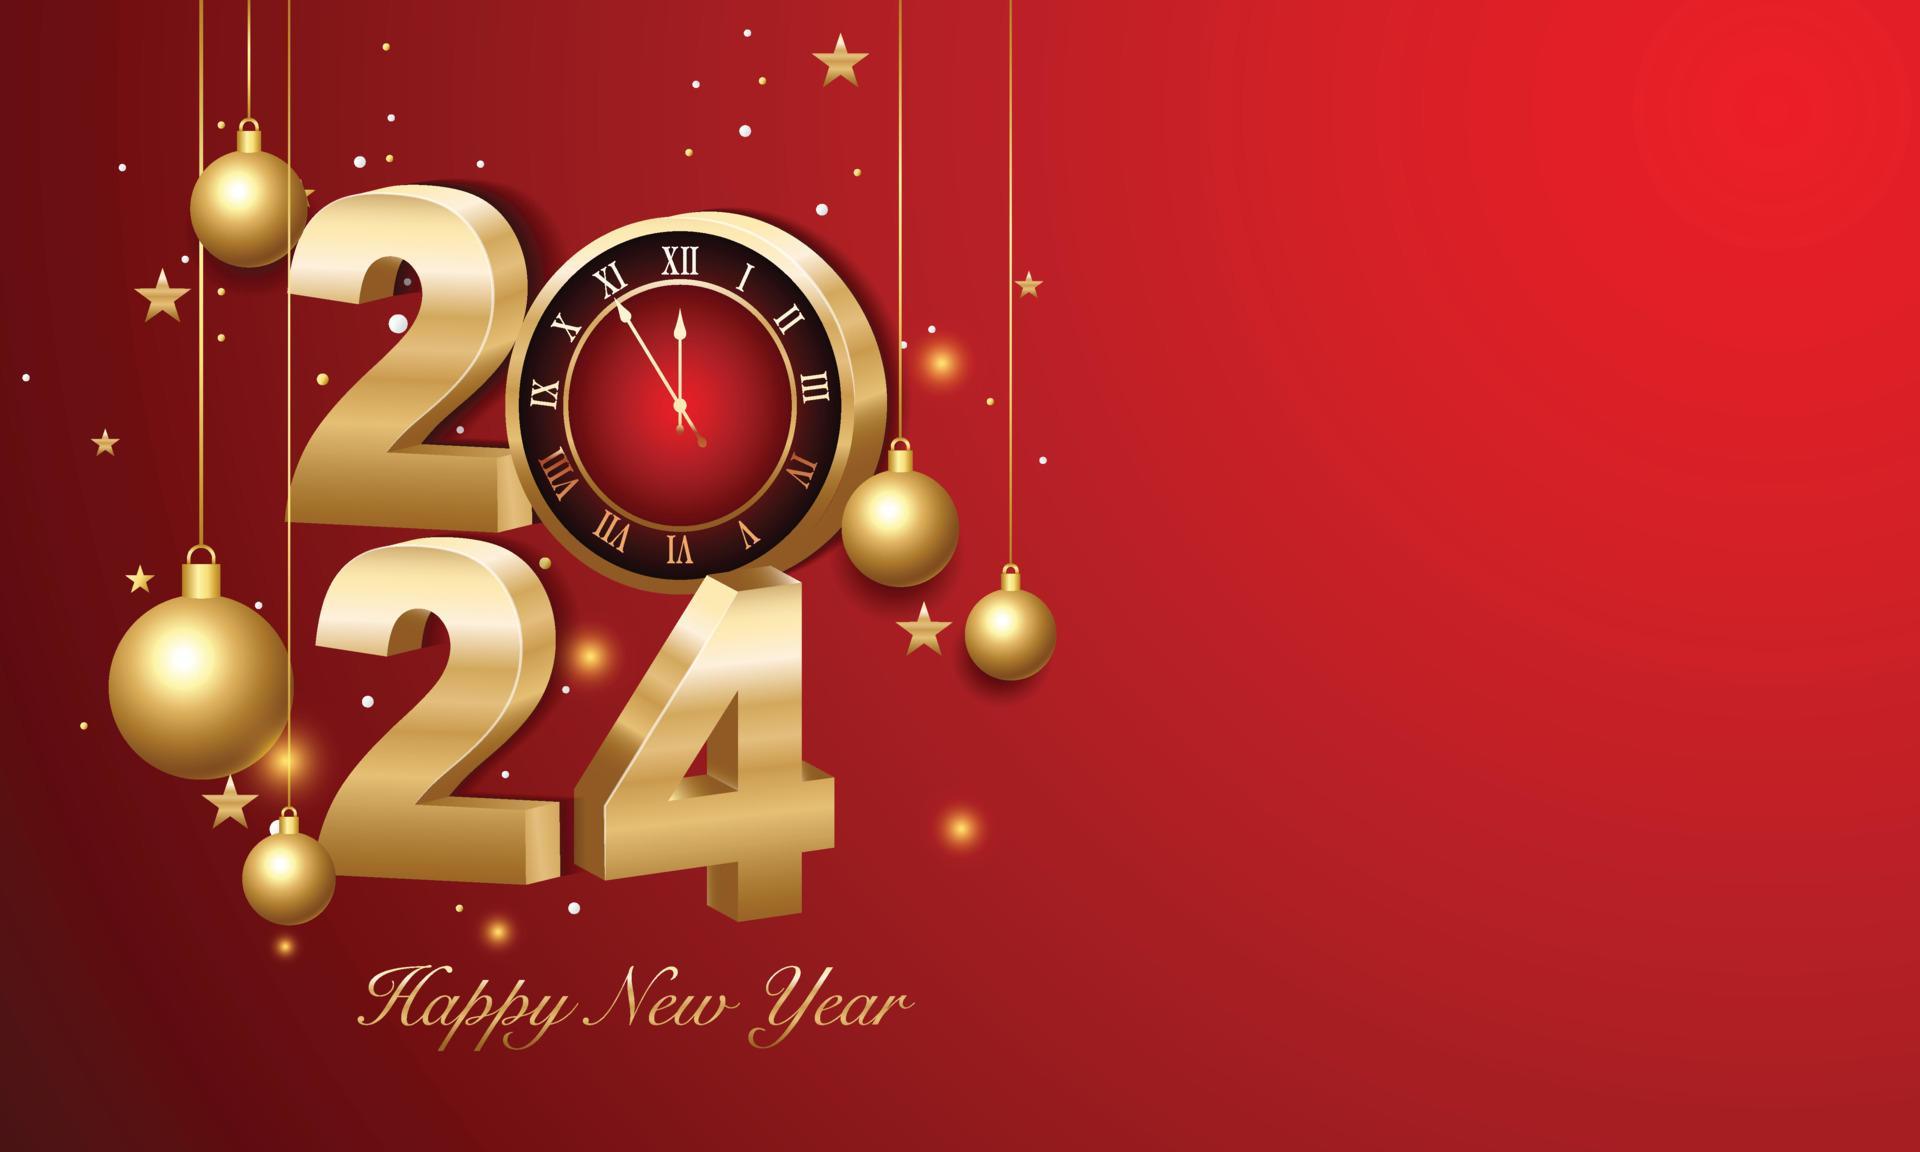 Happy New Year 2024 WhatsApp Stickers: How to Download New Year Stickers